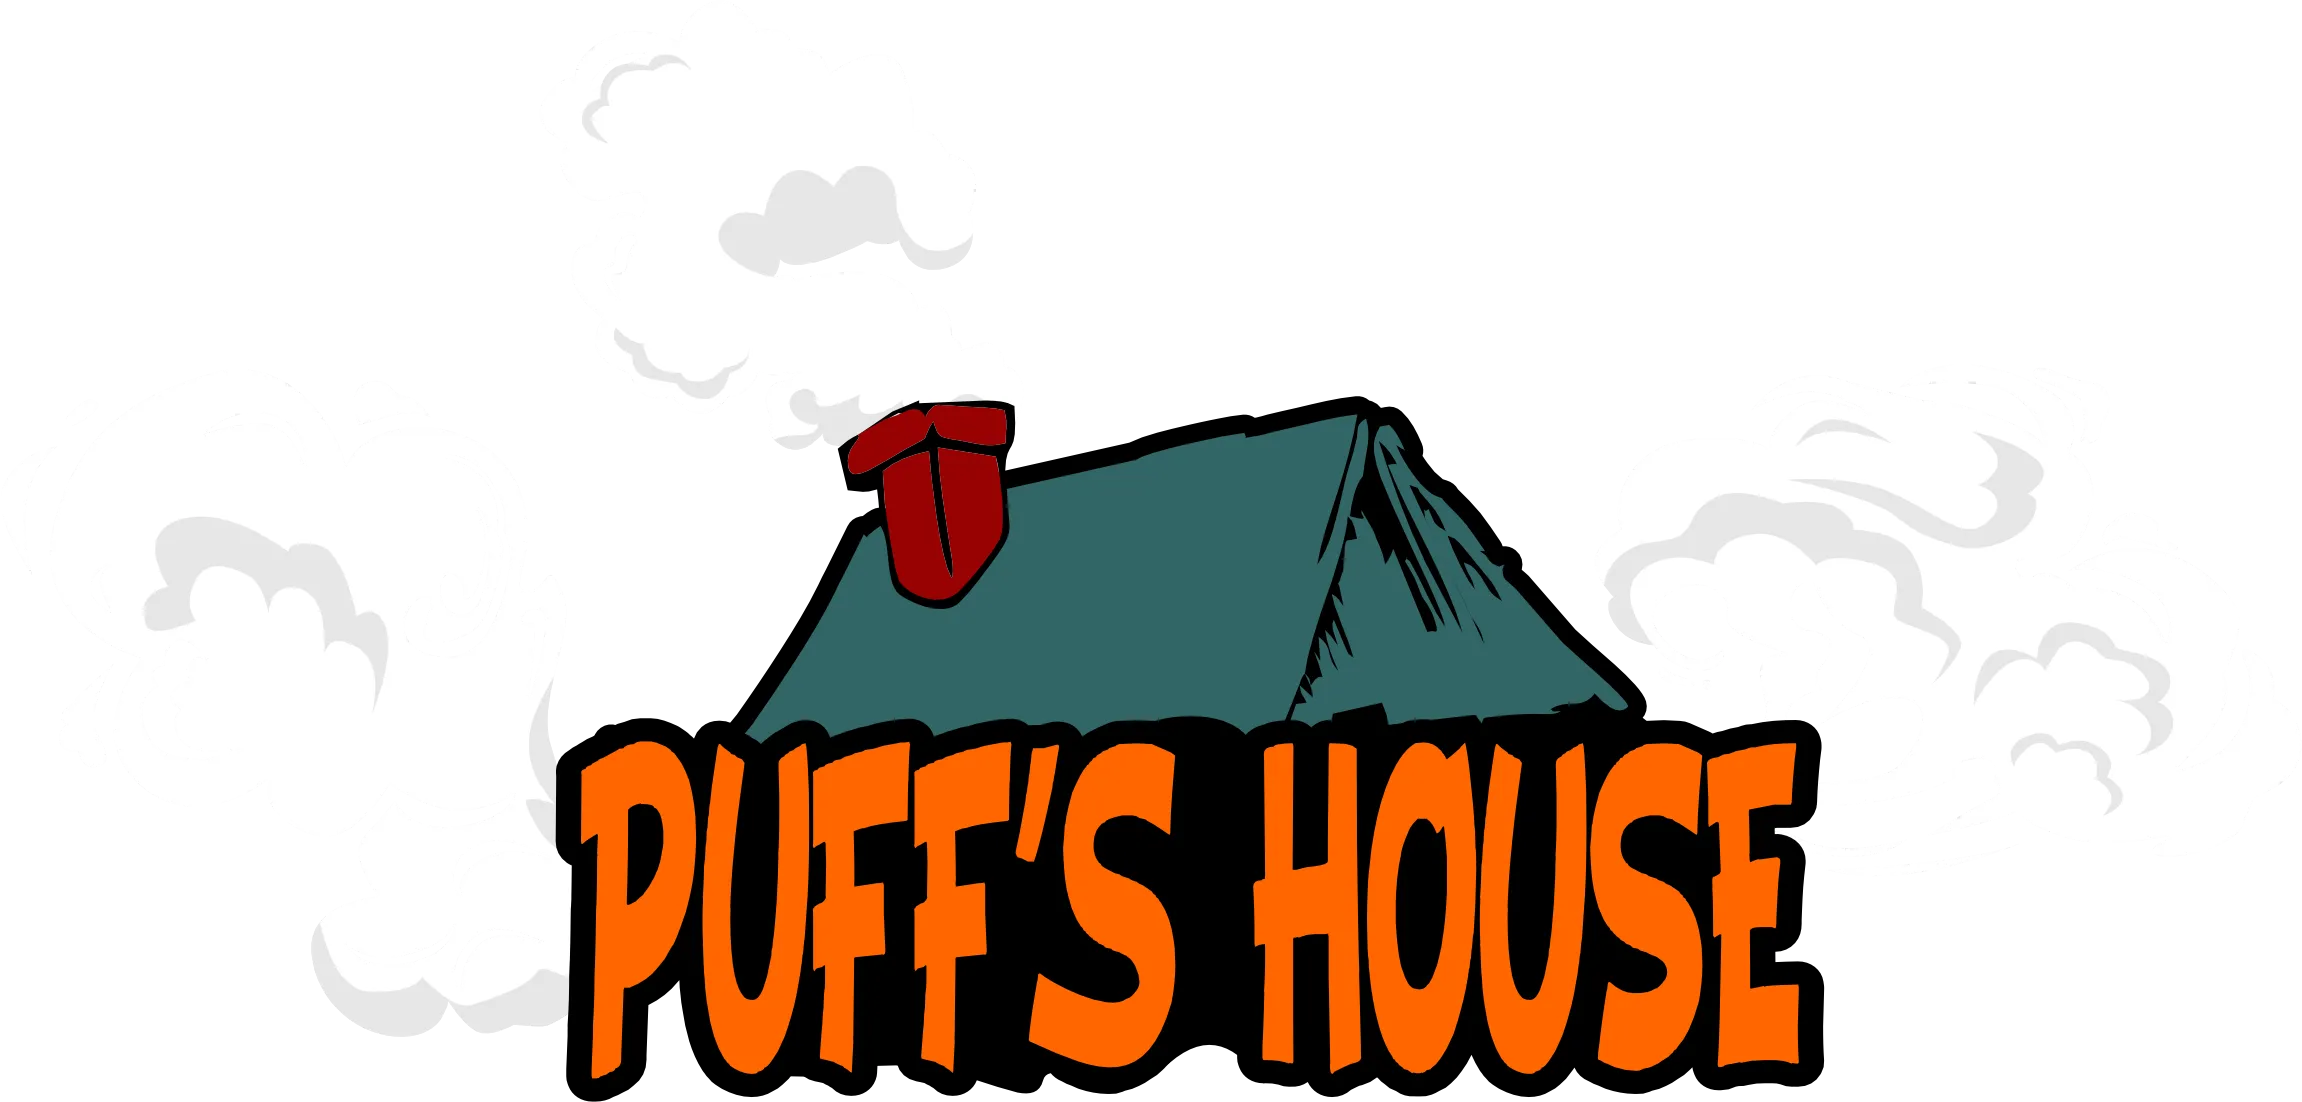 Puff's House